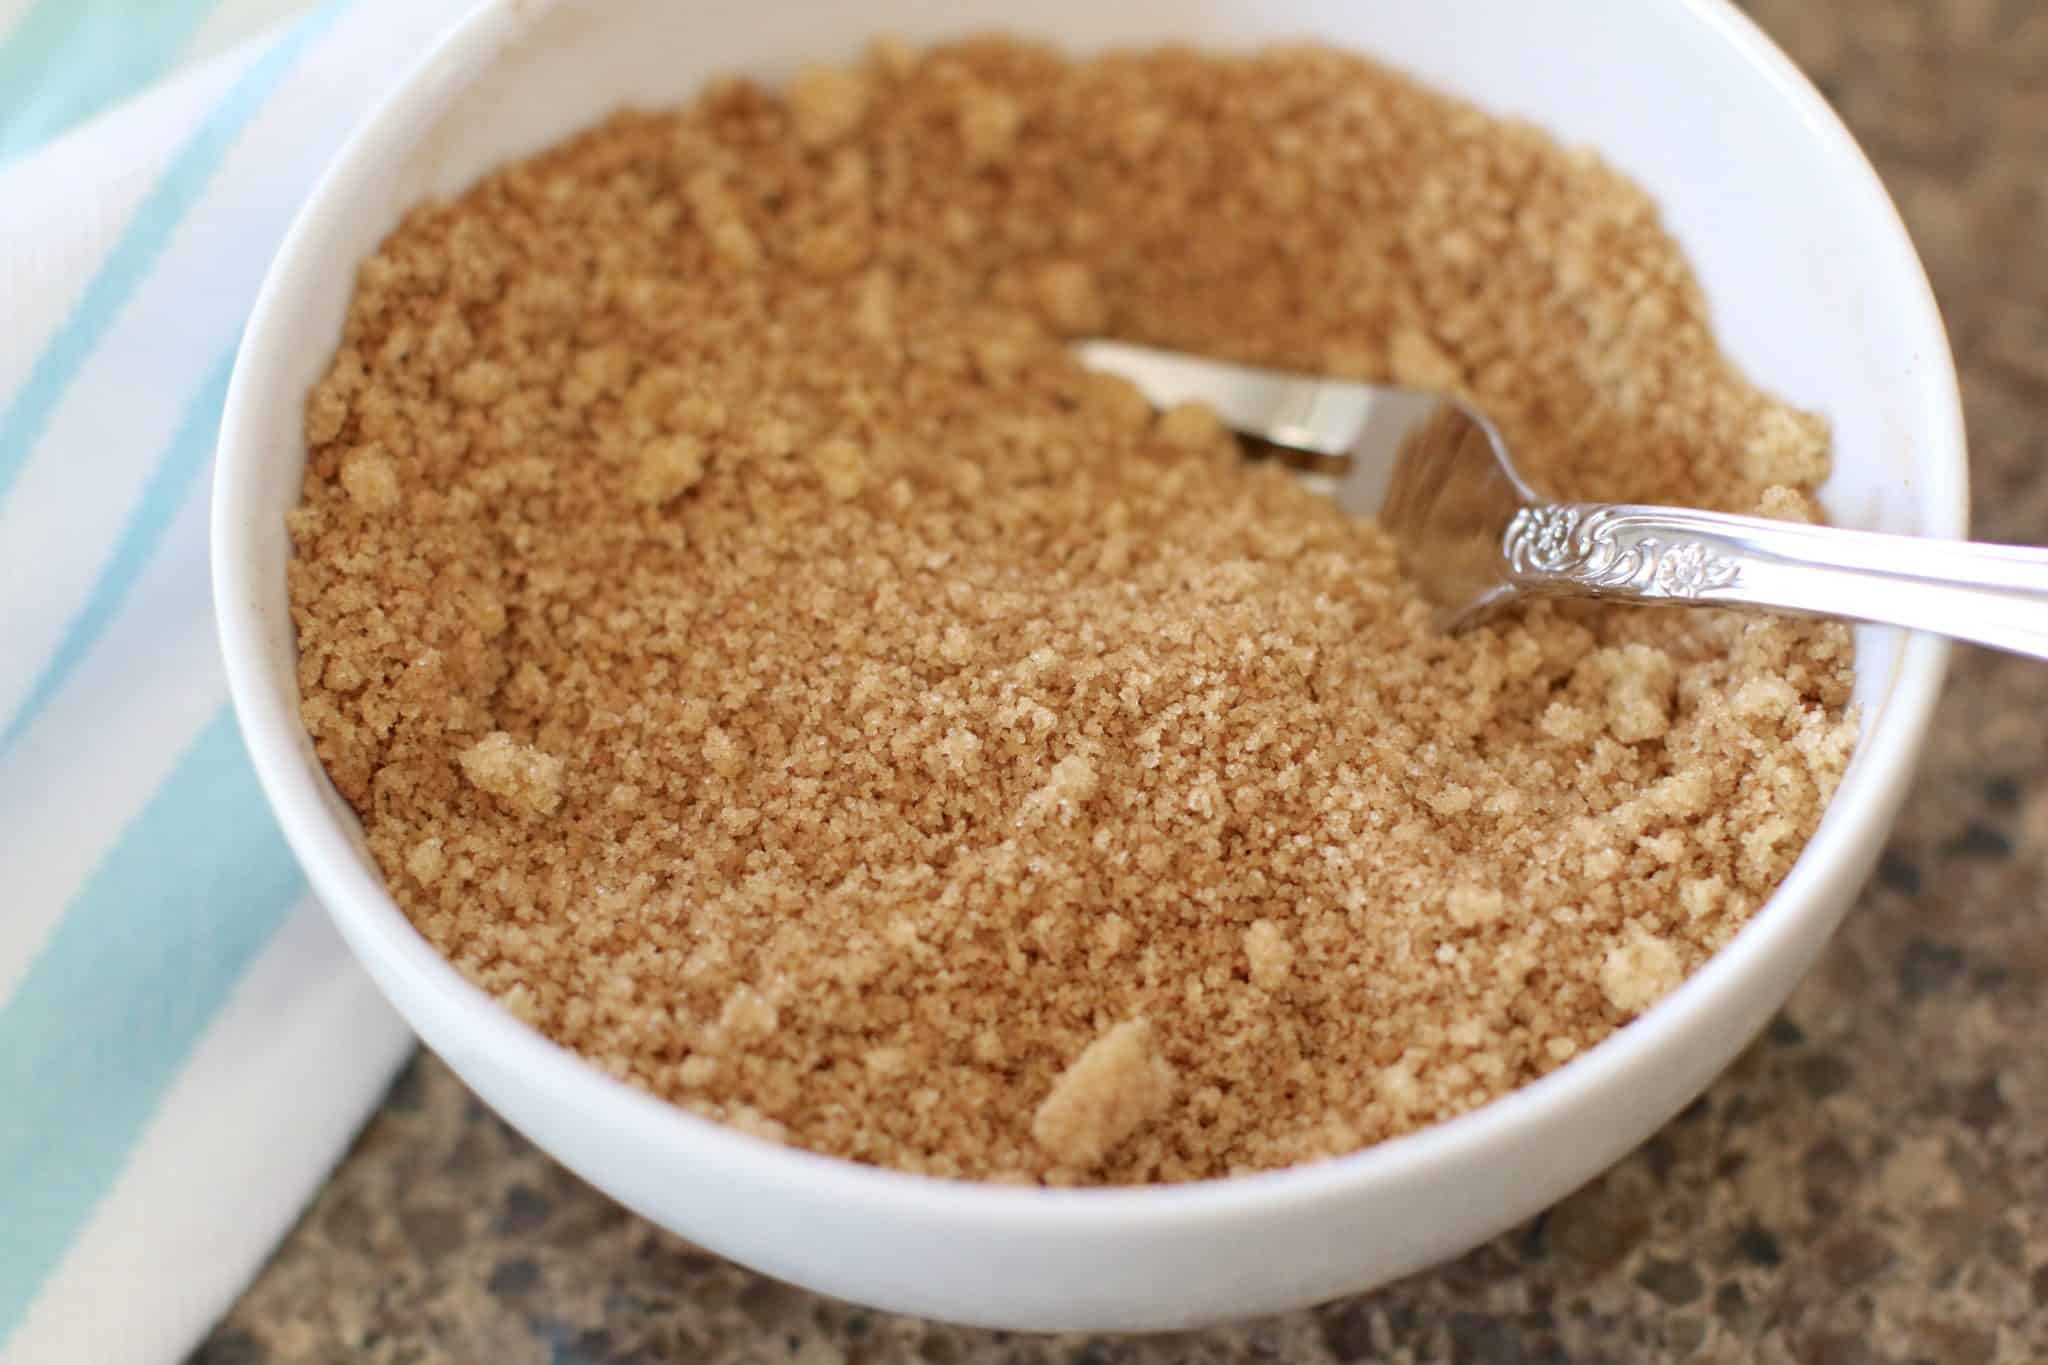 brown sugar and ground cinnamon mixed together with a fork in a small white bowl.